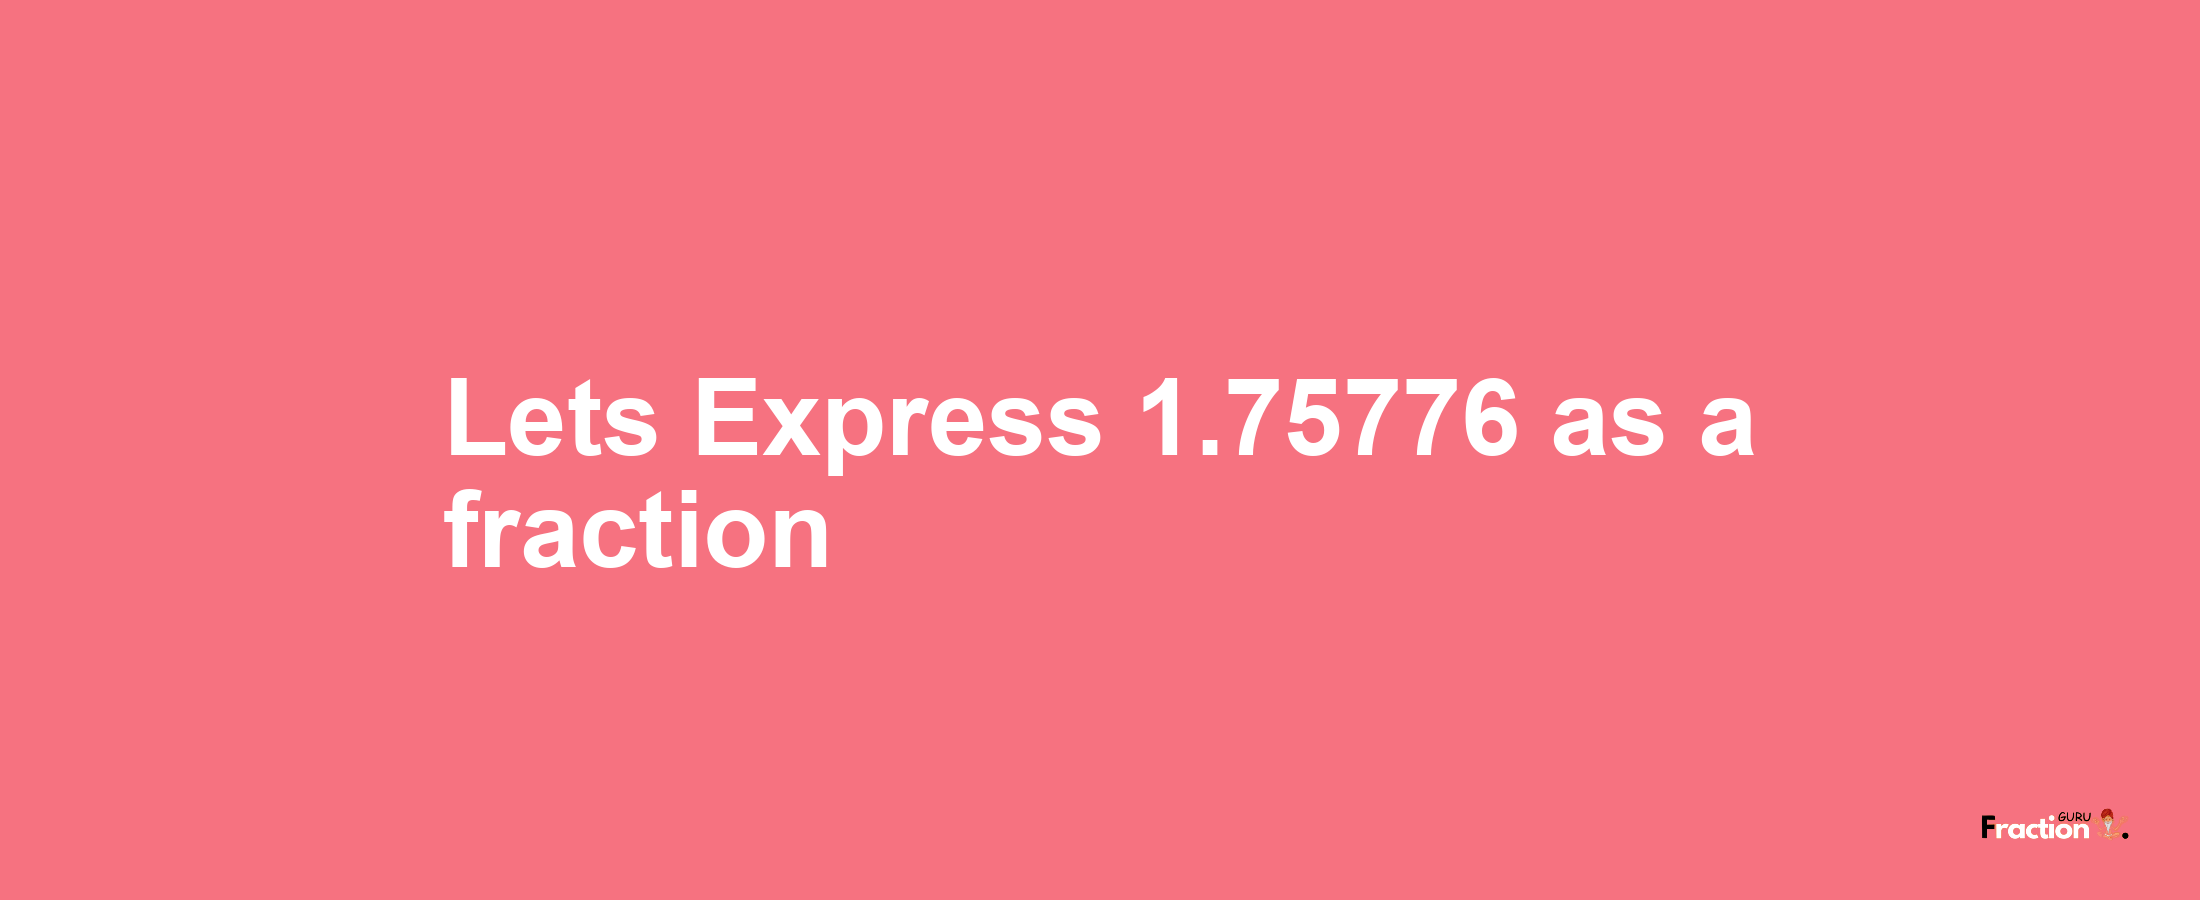 Lets Express 1.75776 as afraction